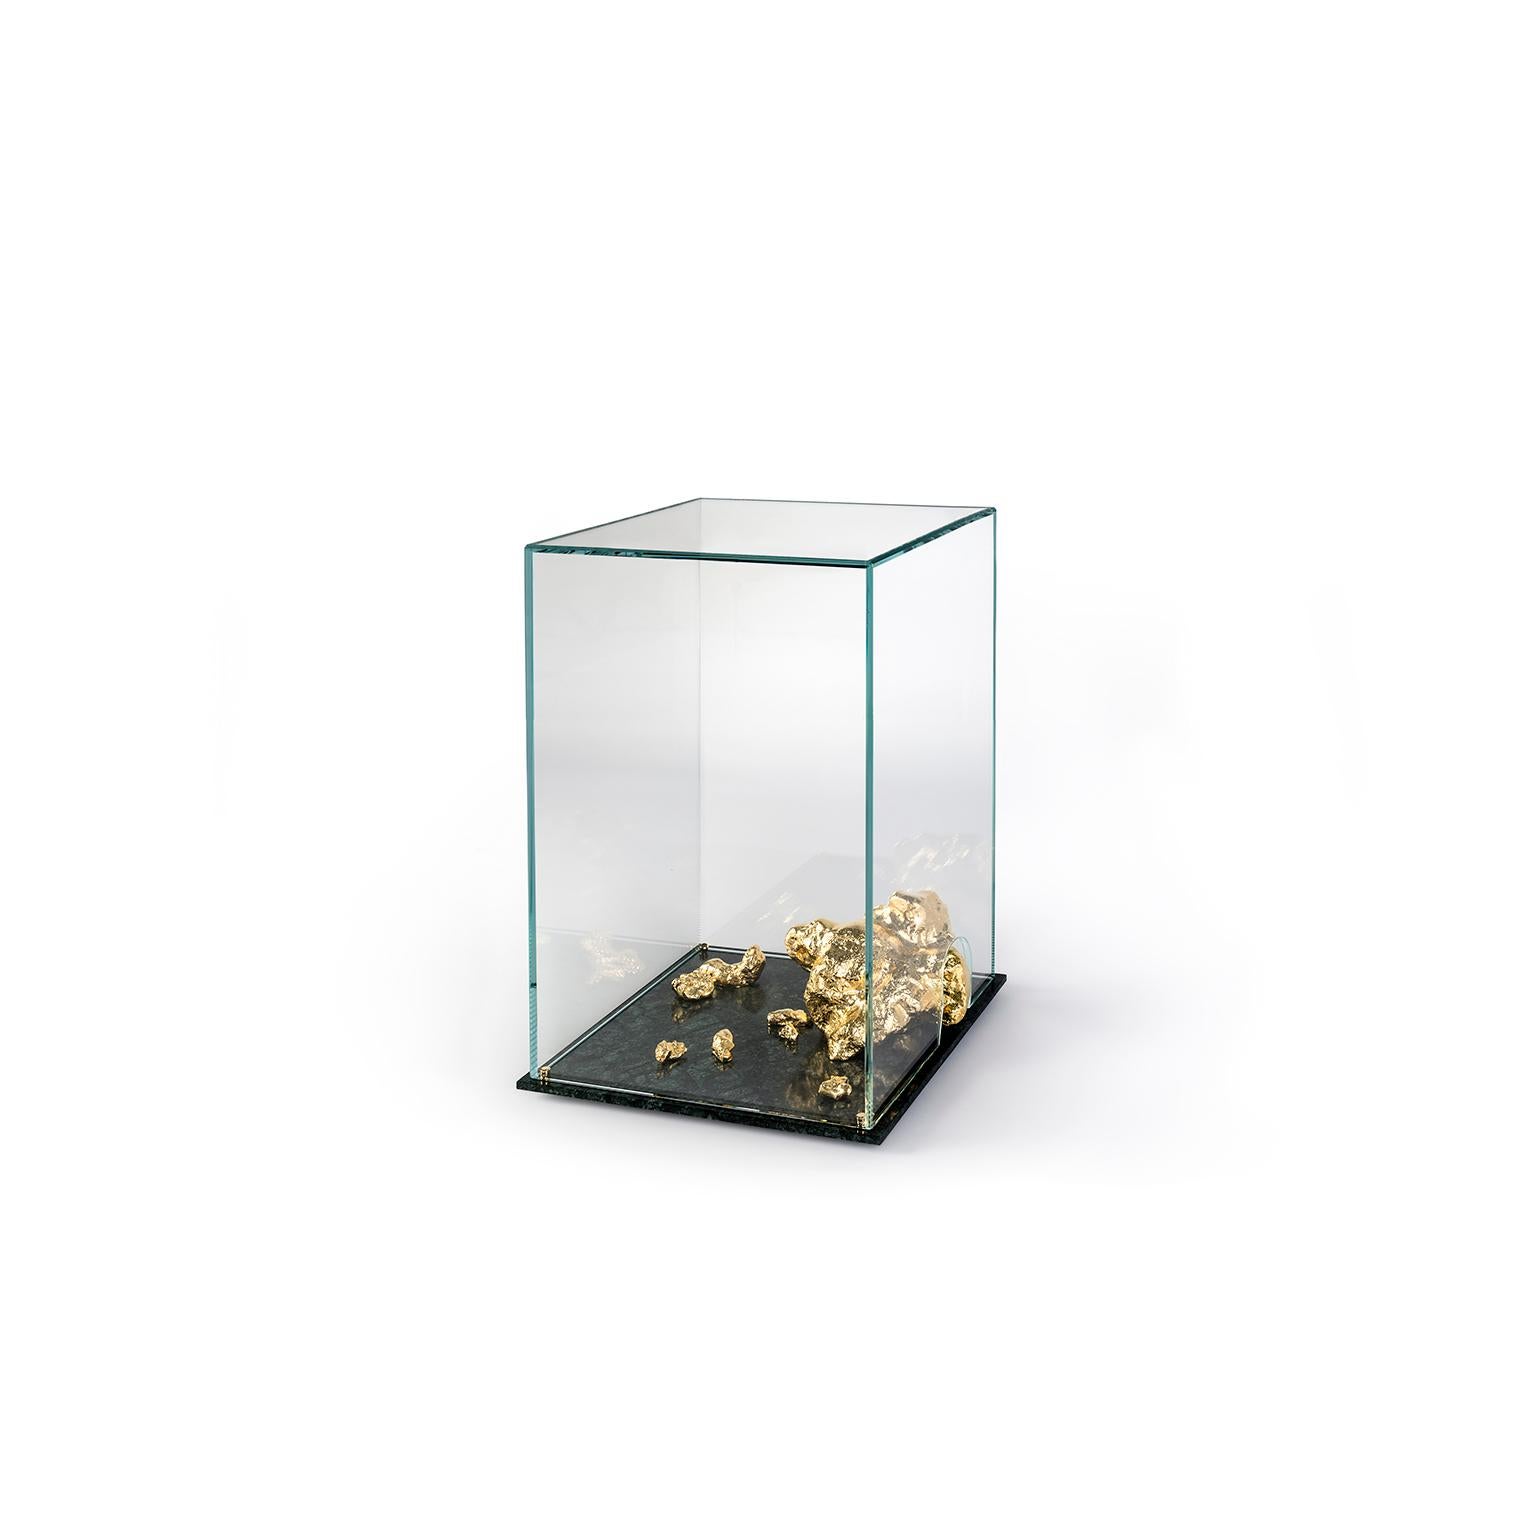 European Modern Aurum Side Table in Tempered Glass, Gold Nuggets and Green Marble Base For Sale